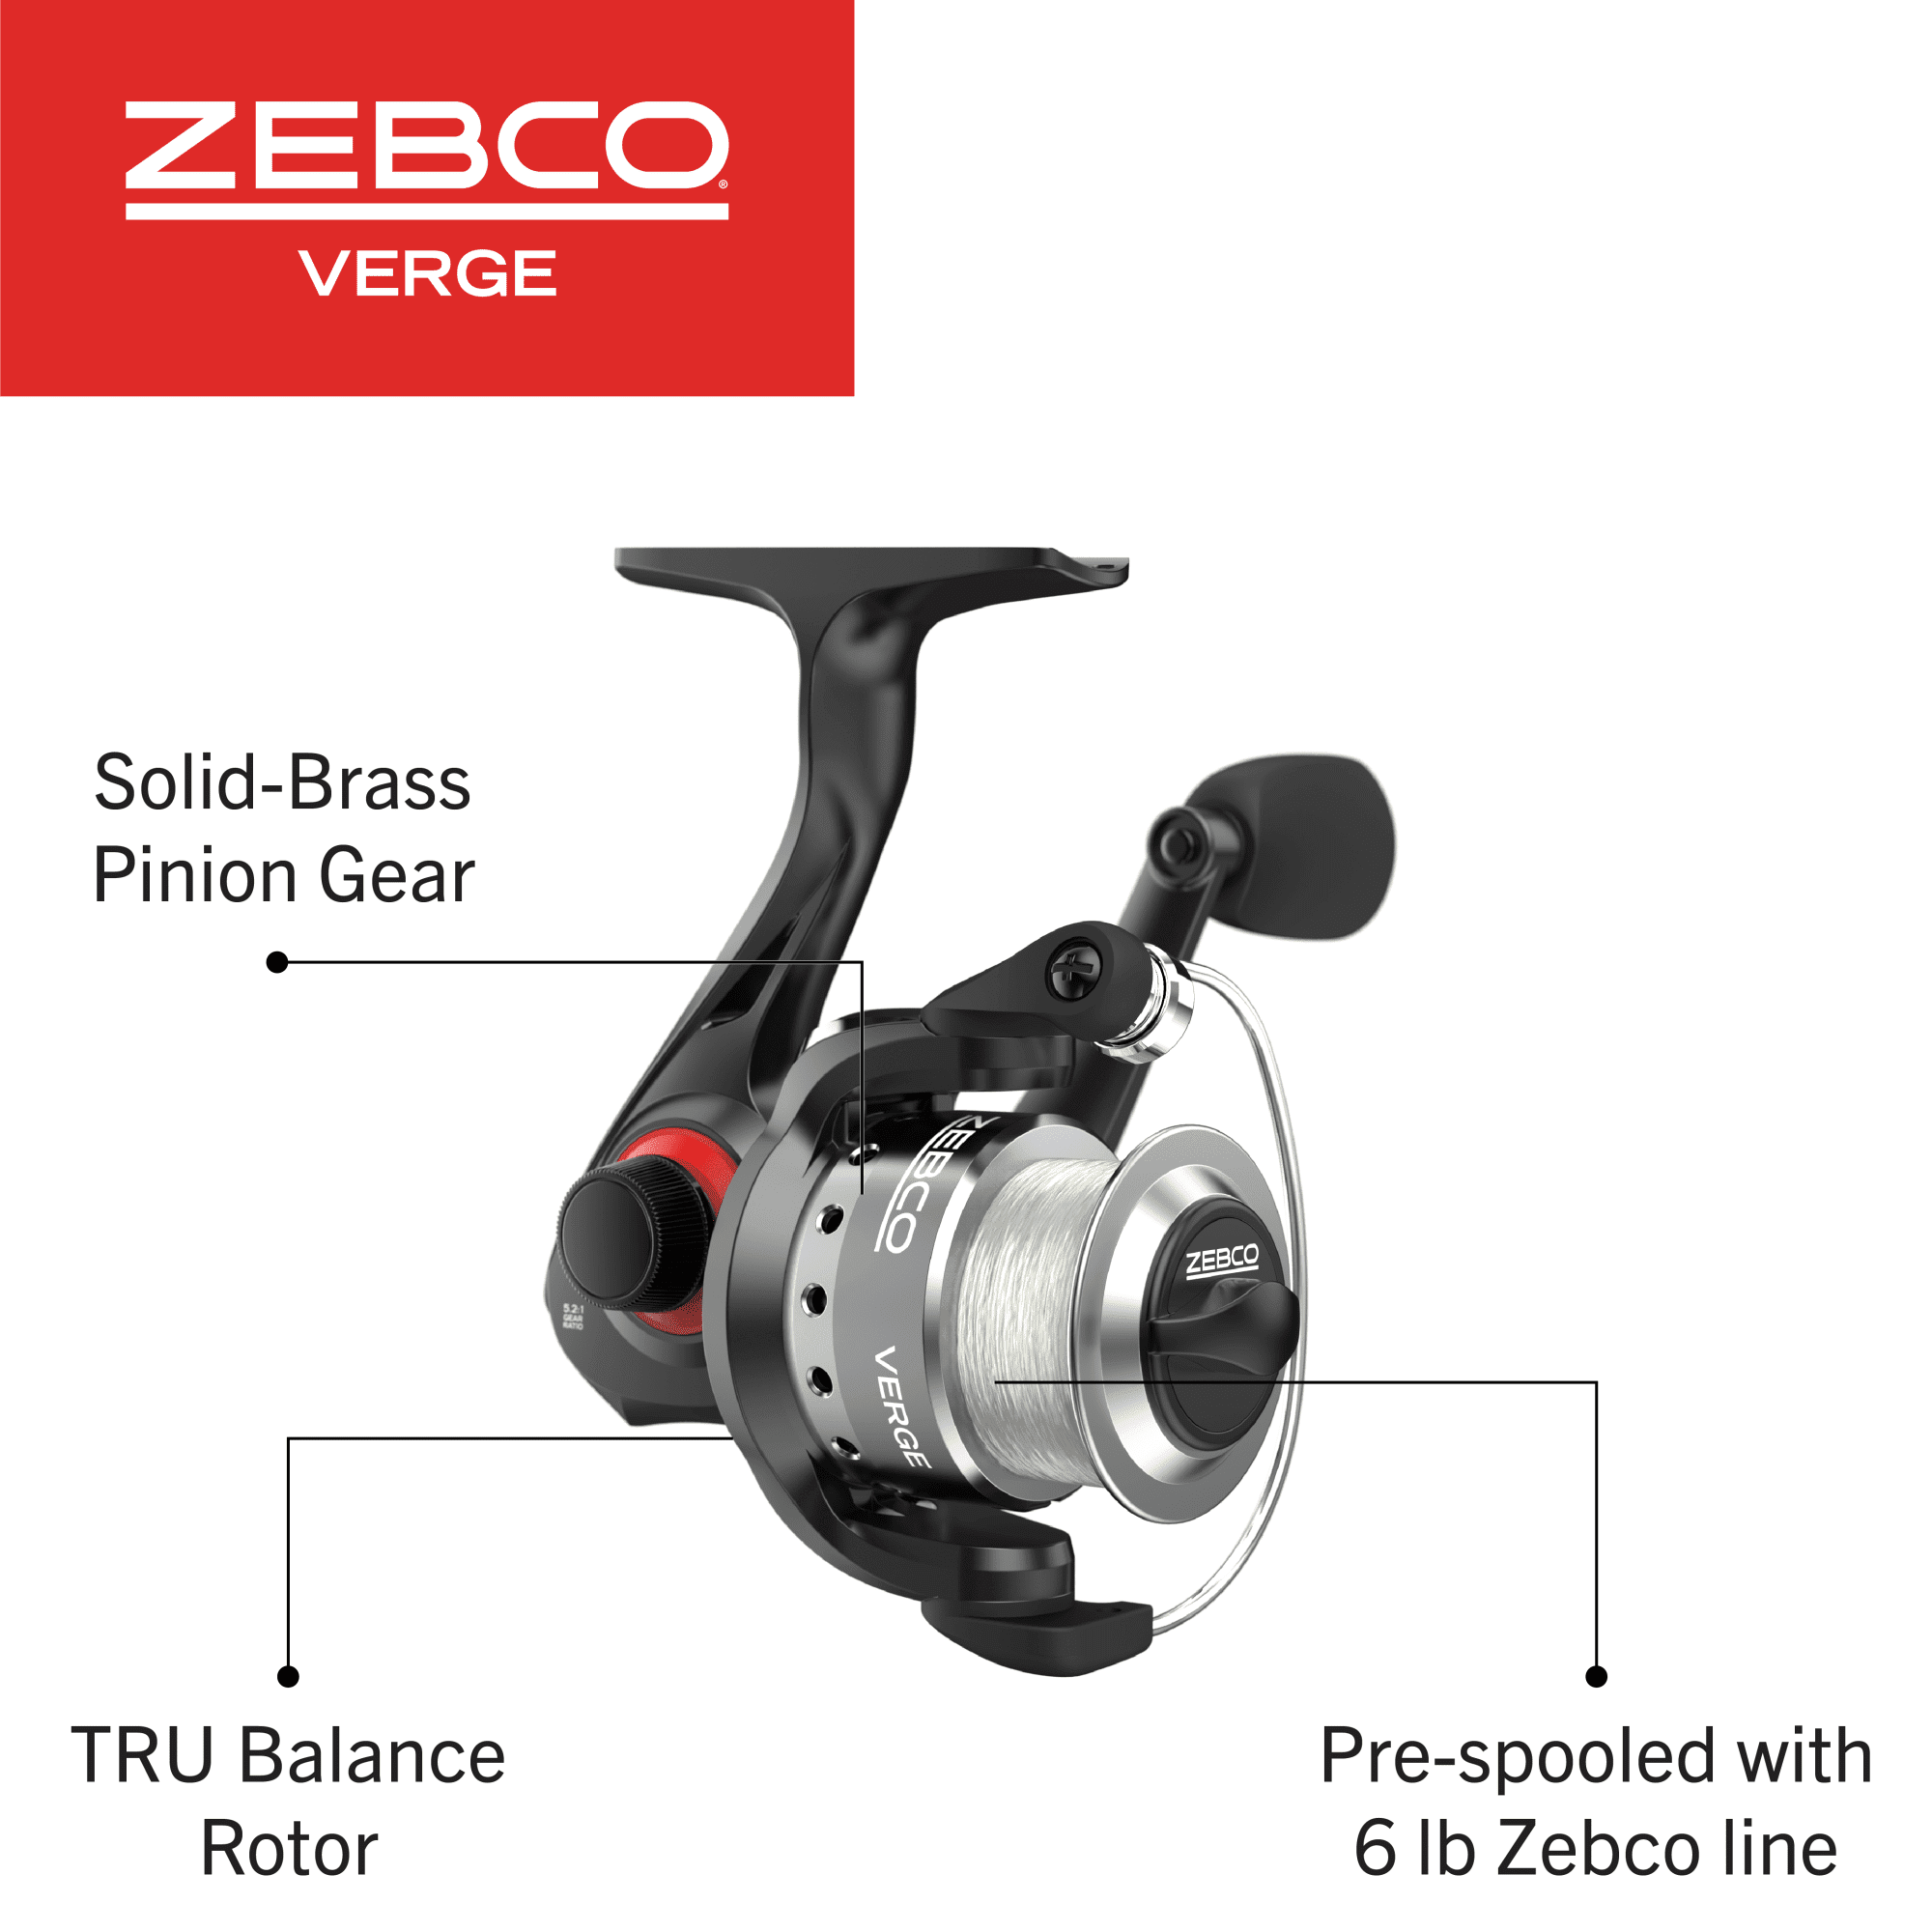 Zebco Verge Spinning Fishing Reel, Size 10 Reel, Changeable Right